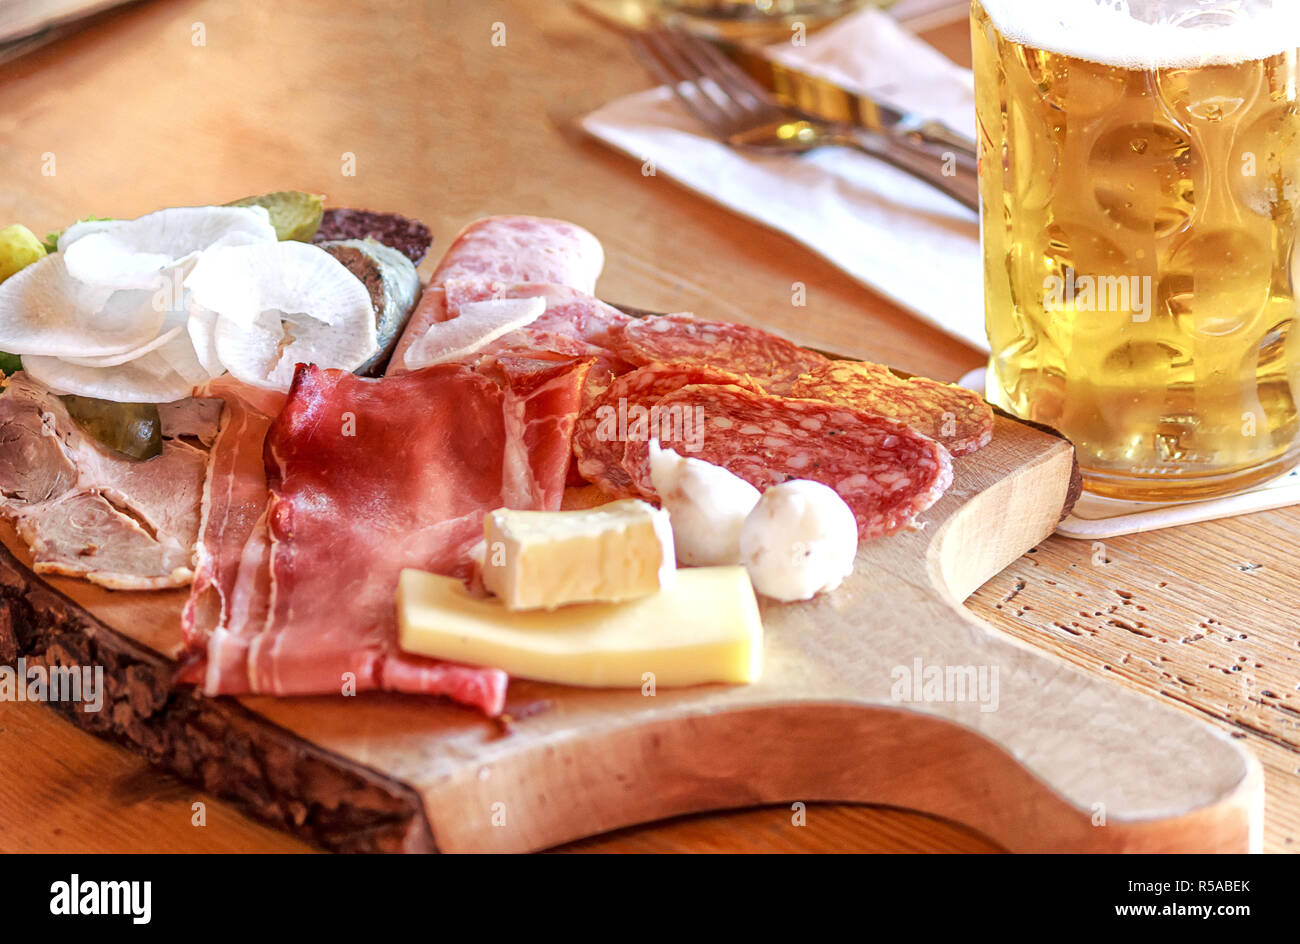 rustic vespers plate with beer Stock Photo